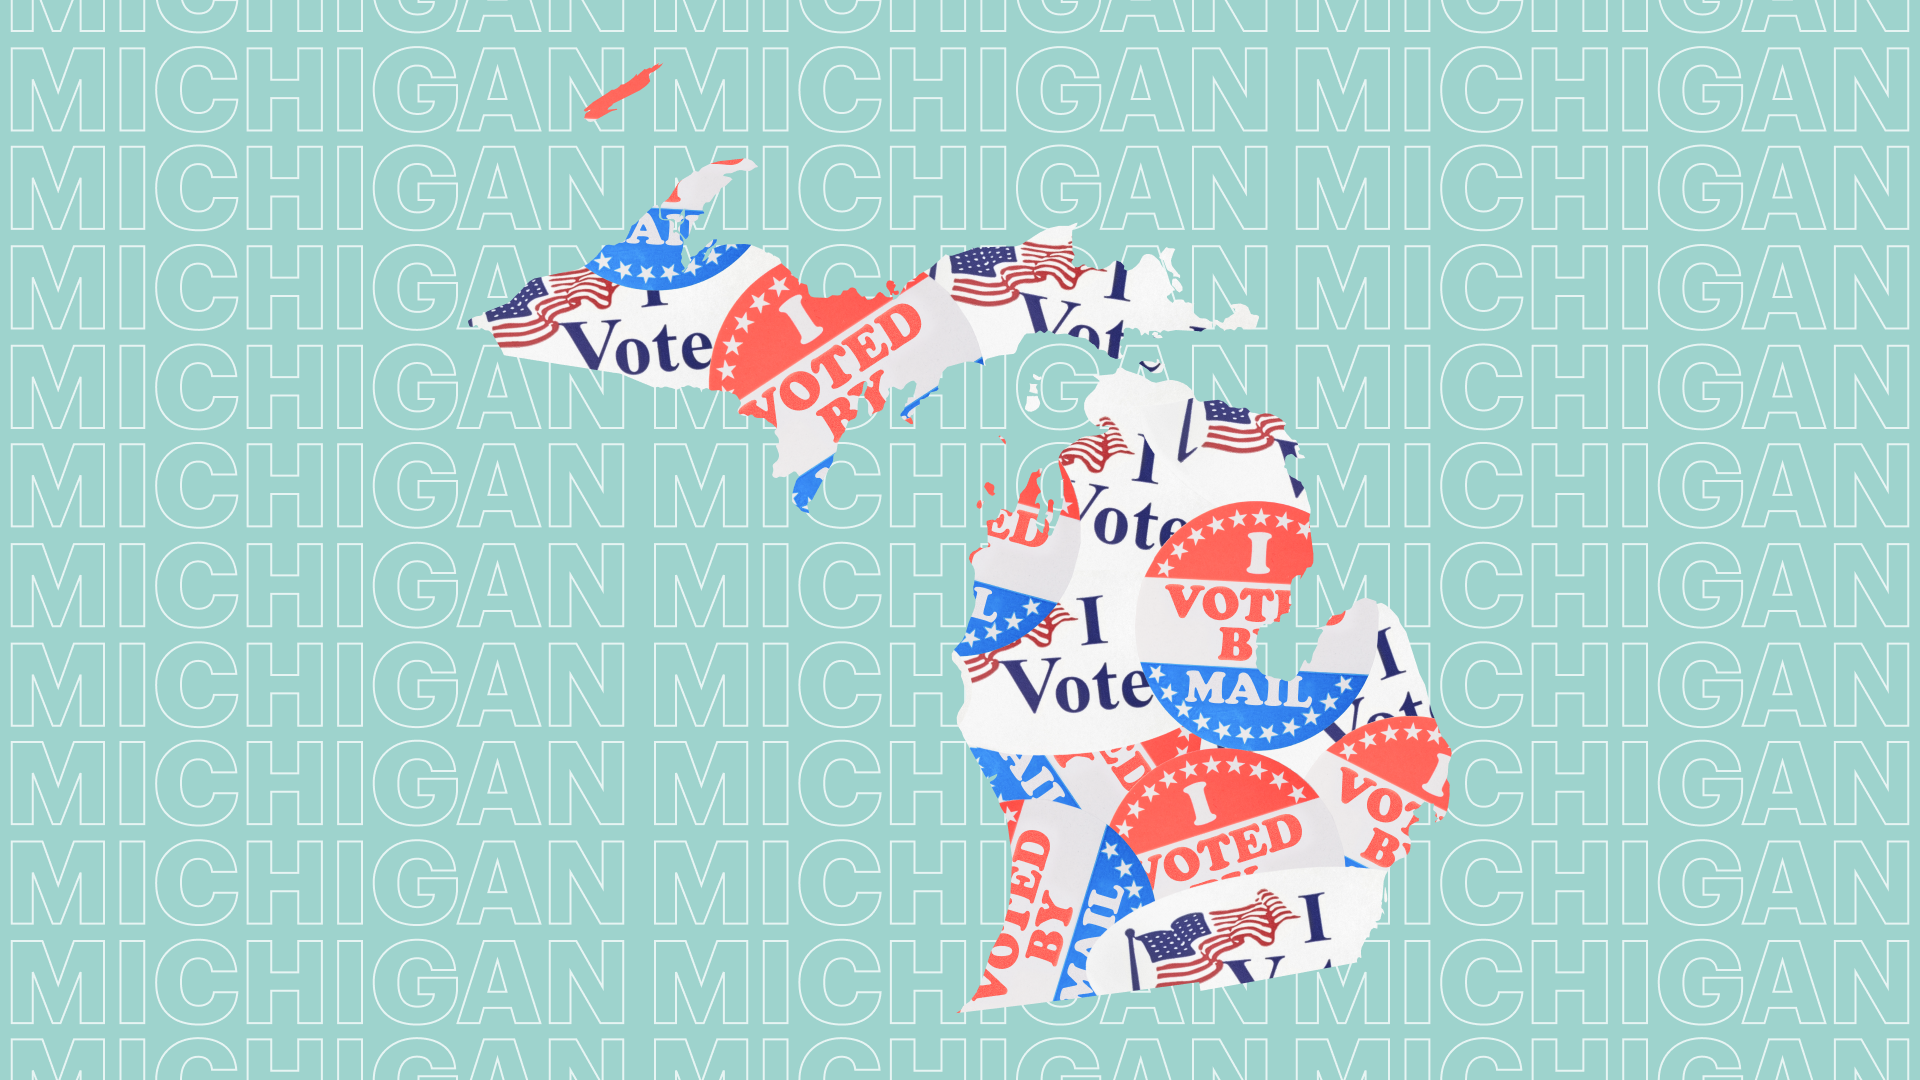 Michigan state with I voted images over it